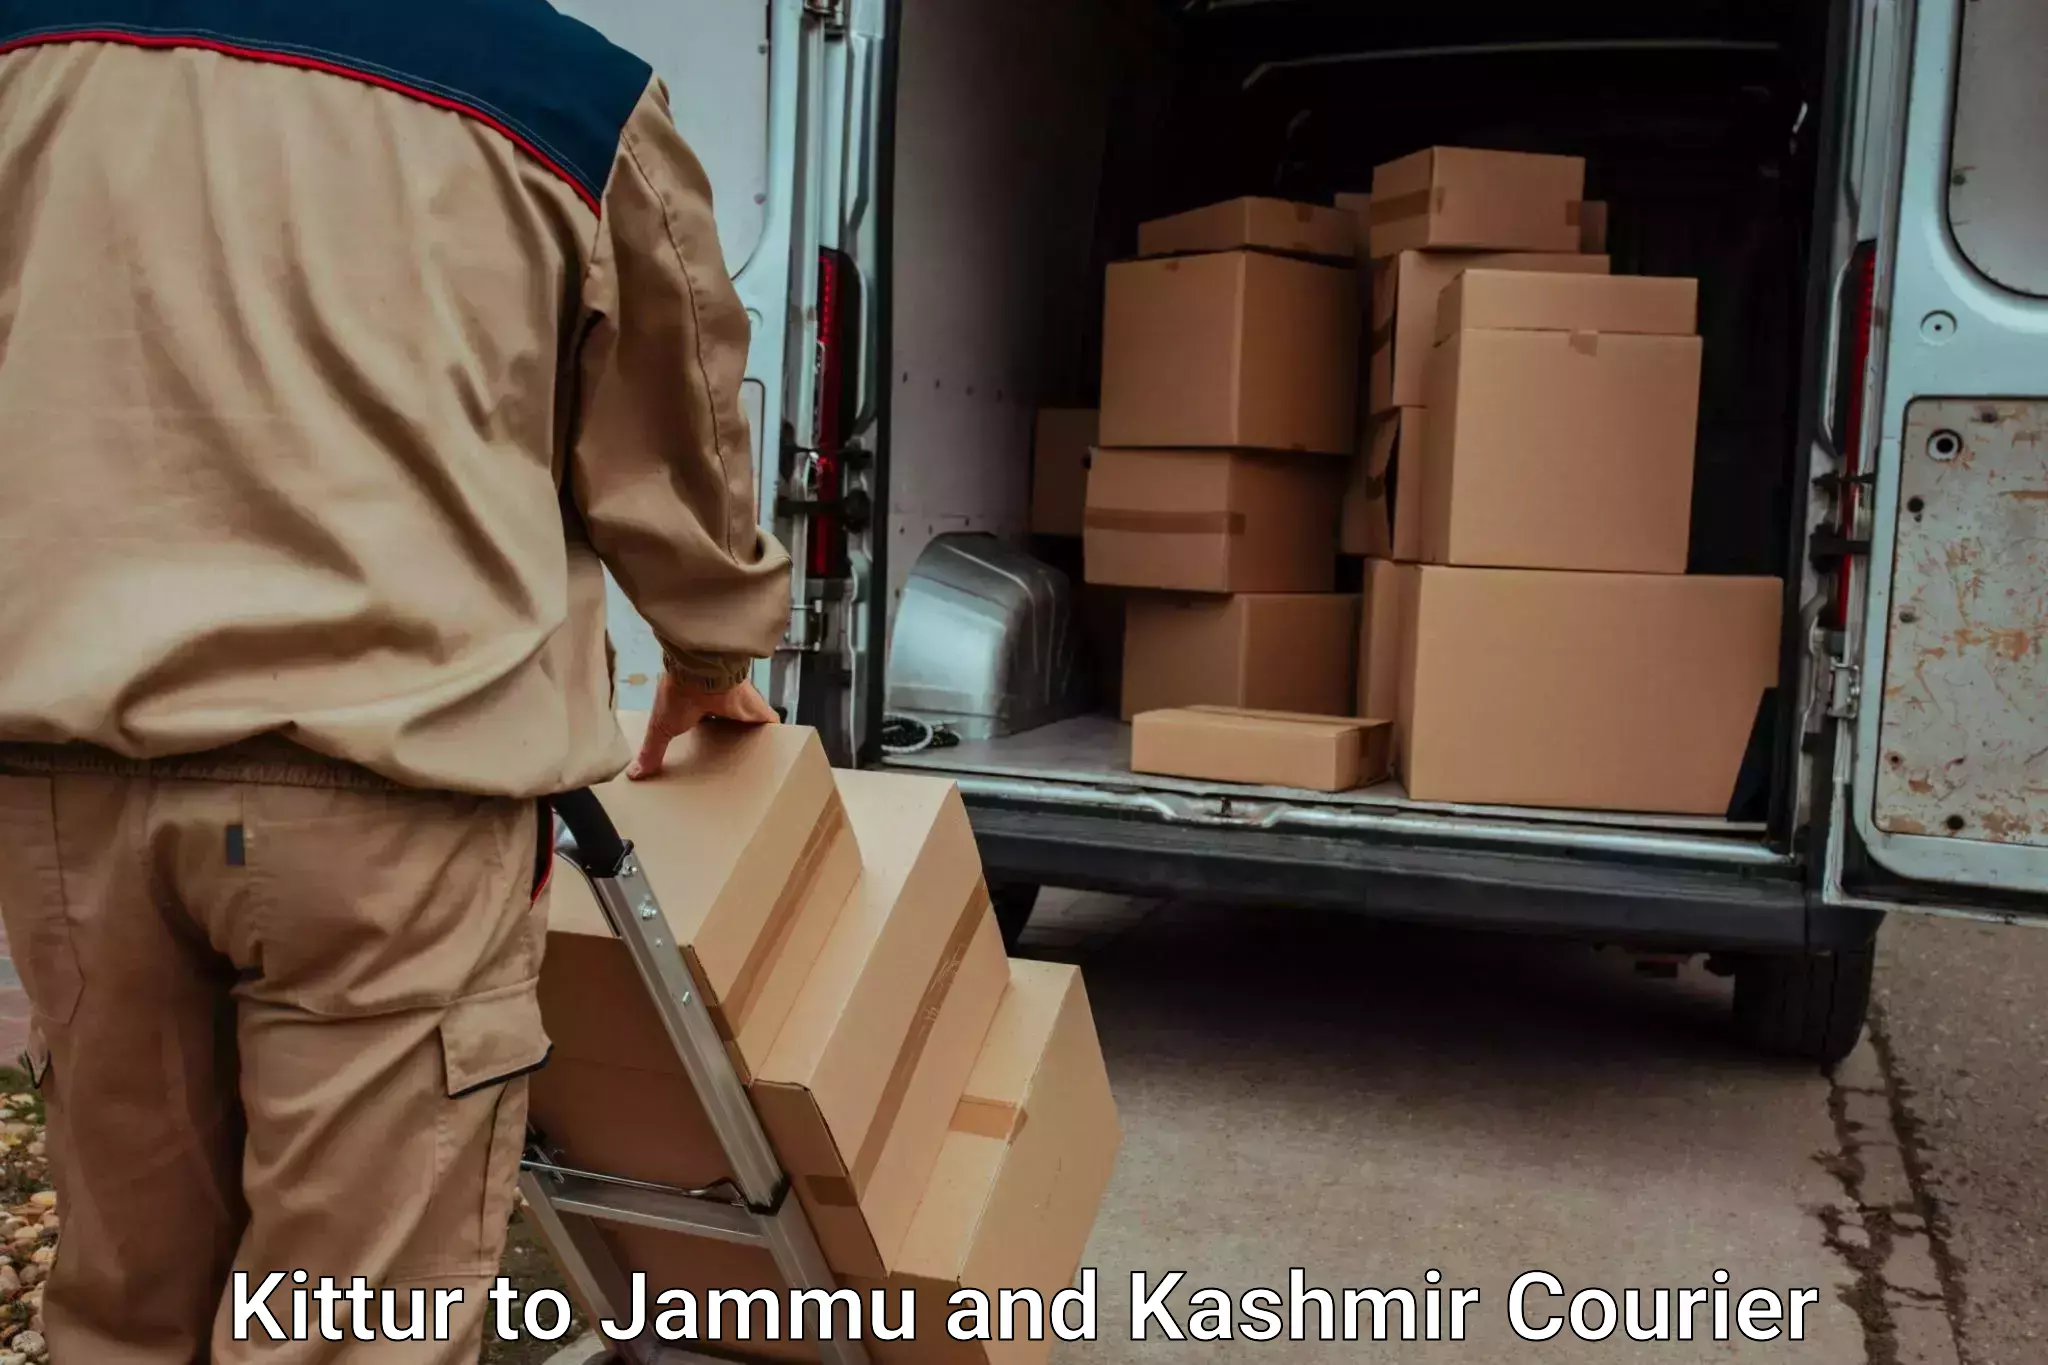 Trusted relocation services in Kittur to Anantnag